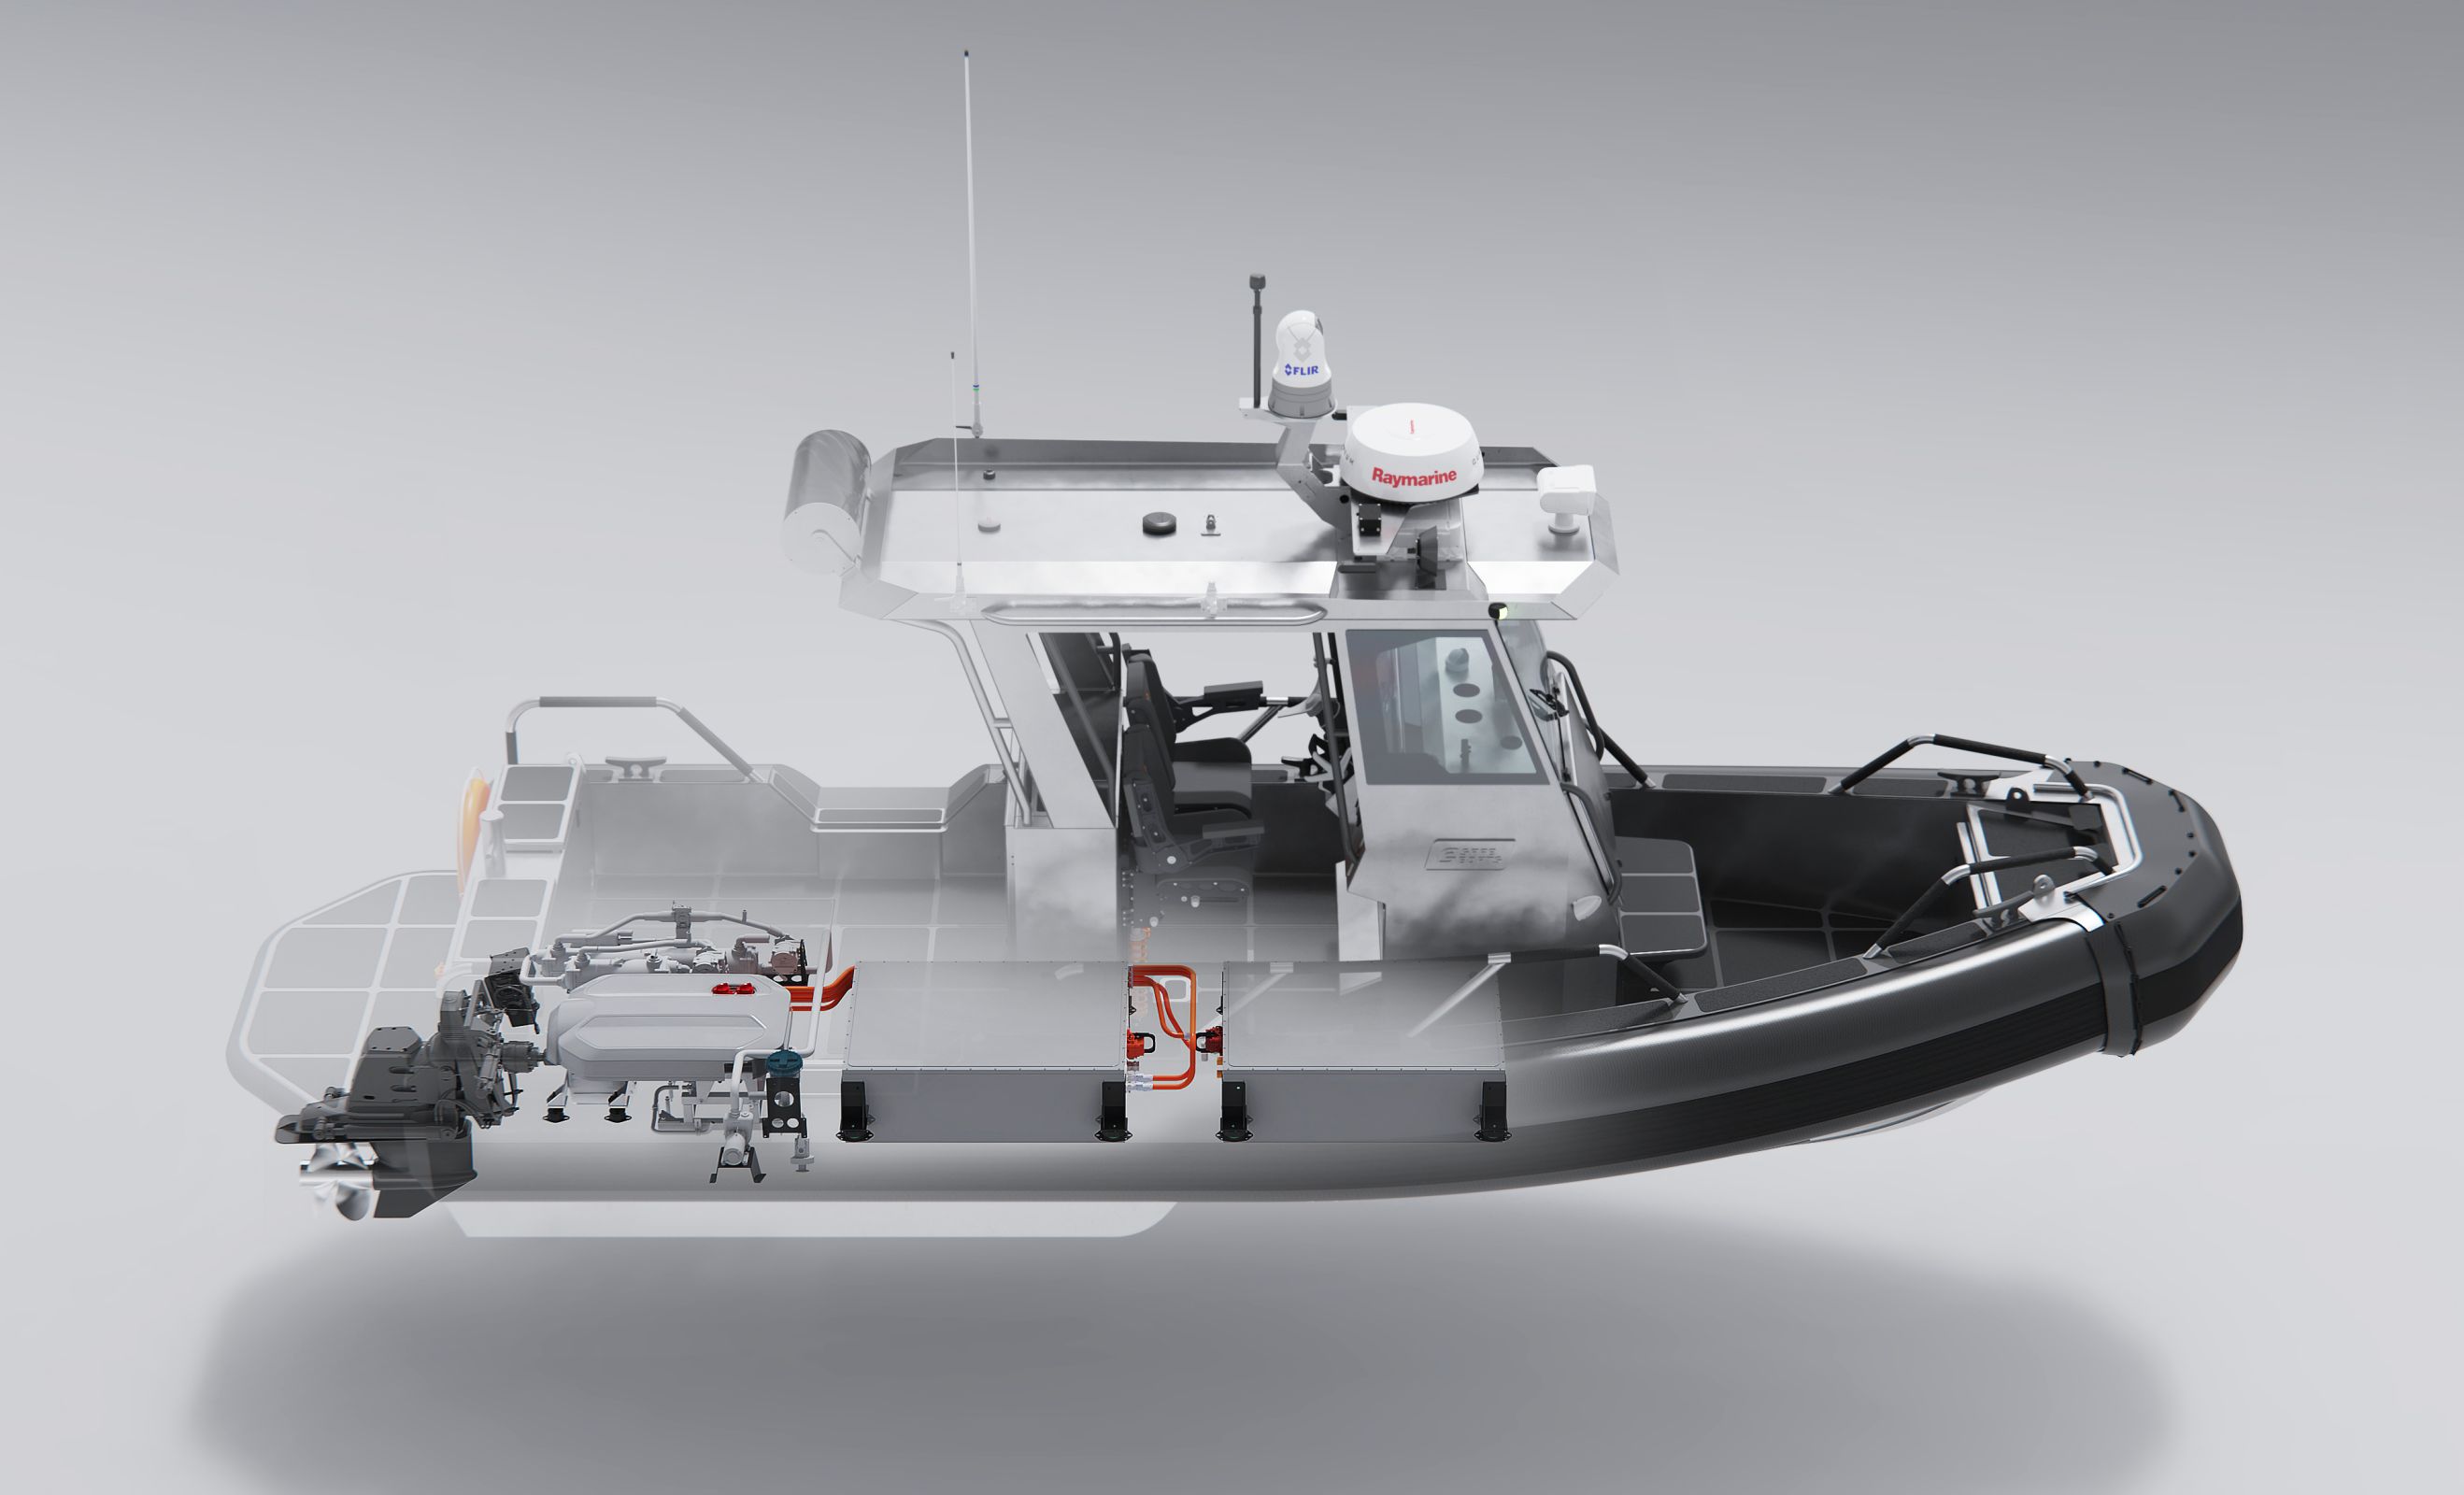 SAFE Boats and Vita Power Enter into an MOU to Build Zero-Emission Patrol Boat Options Photo